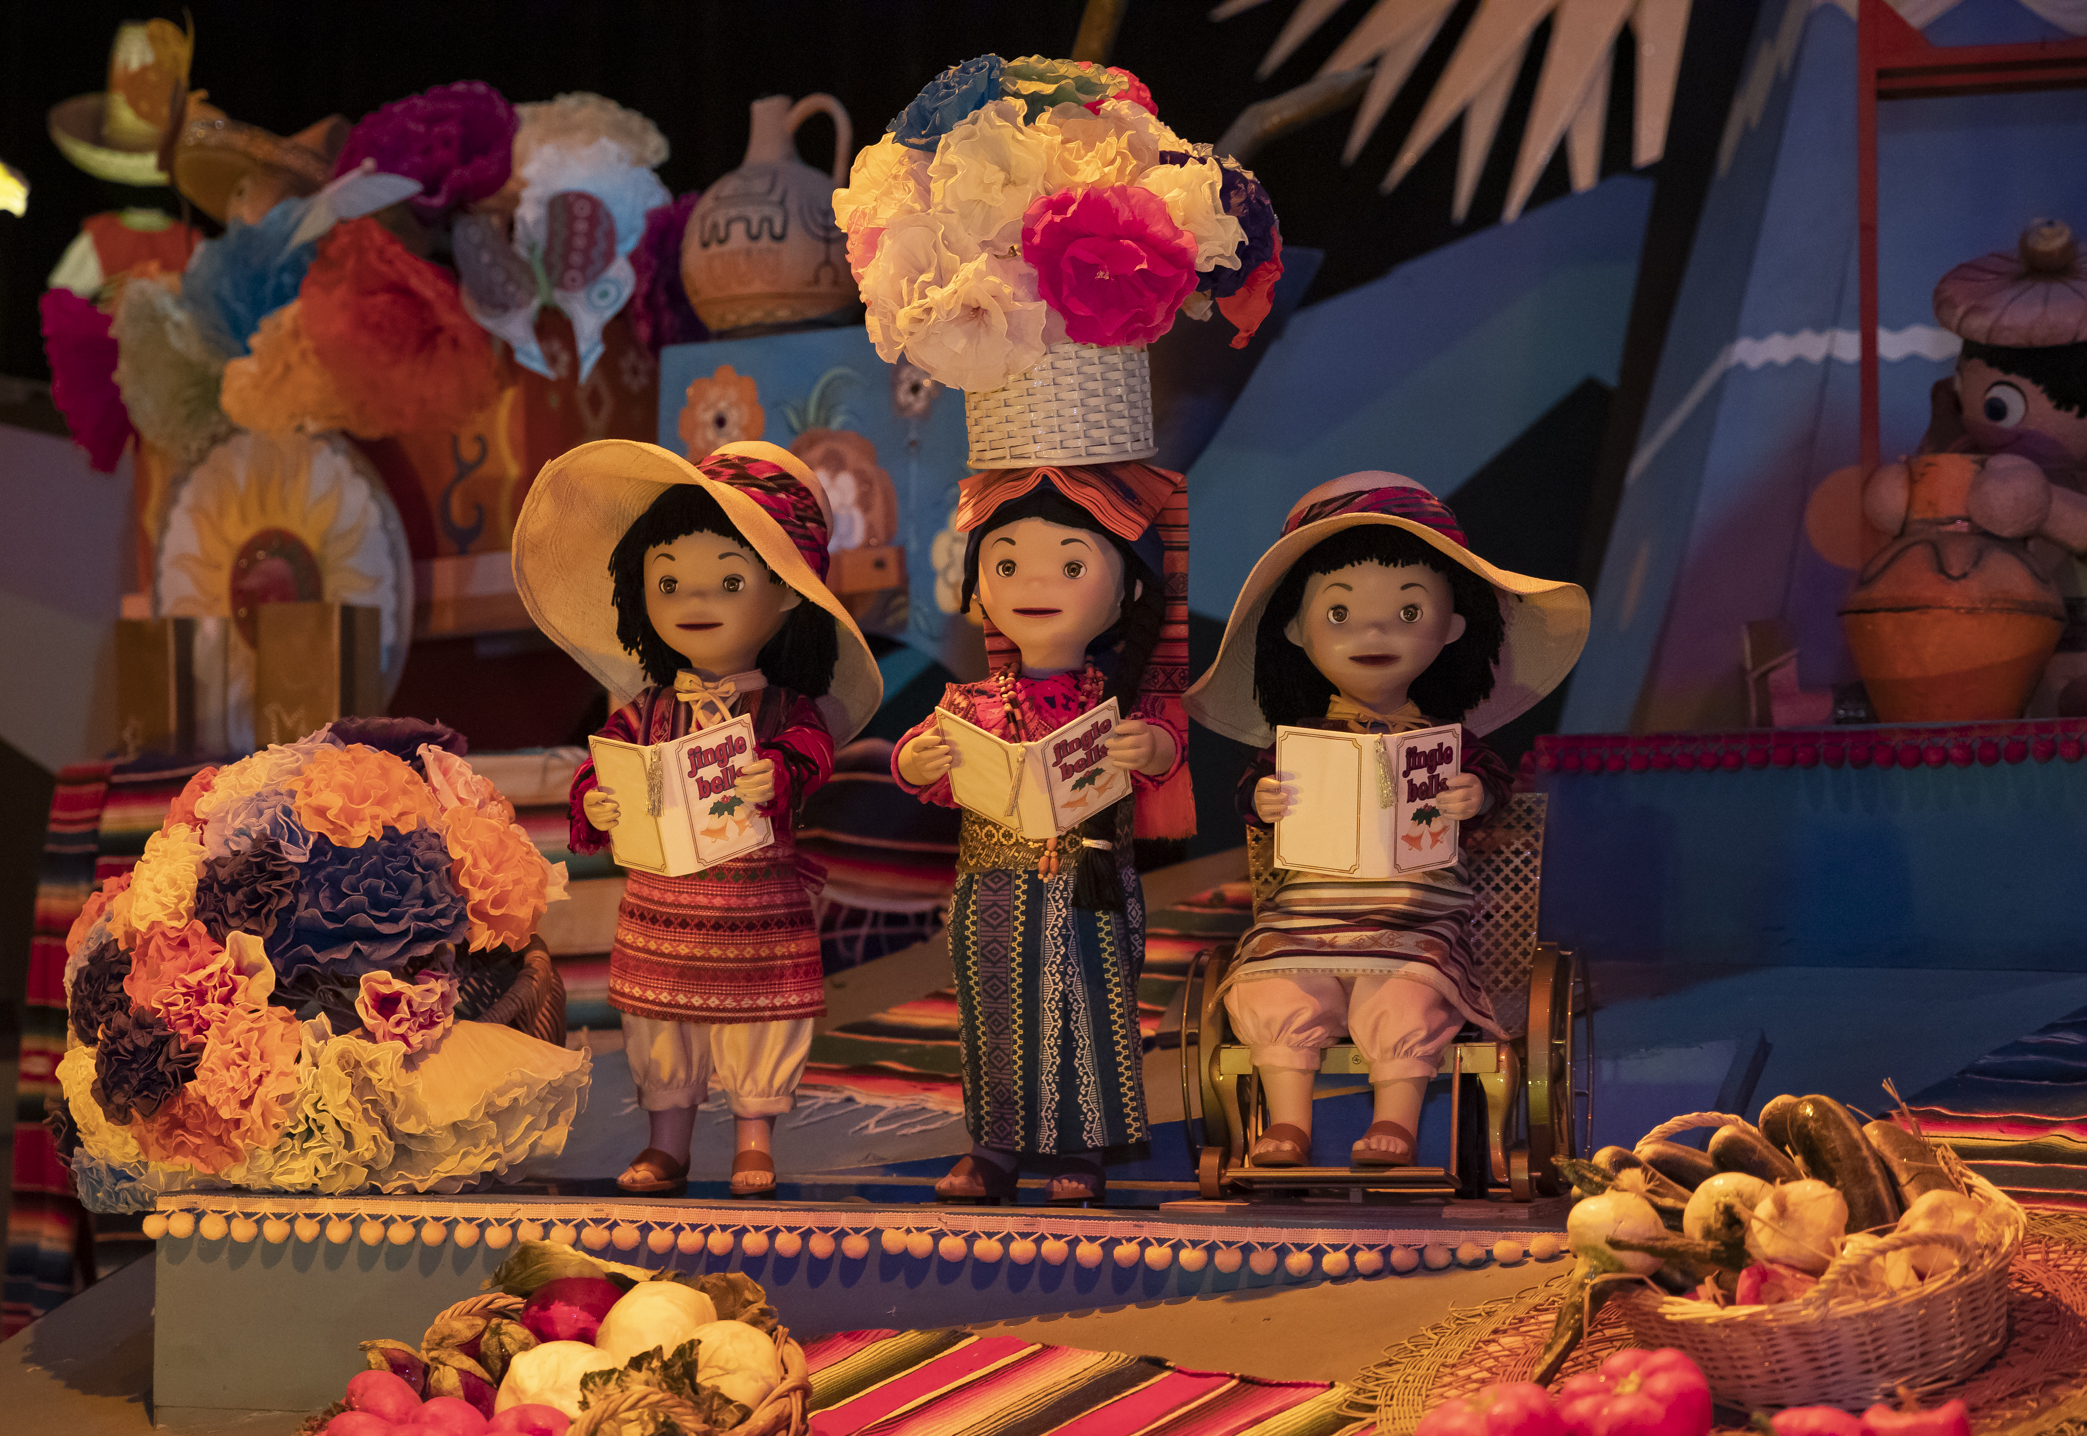 Disneyland adds dolls in wheelchairs to 'It's a Small World' ride | CNN  Travel